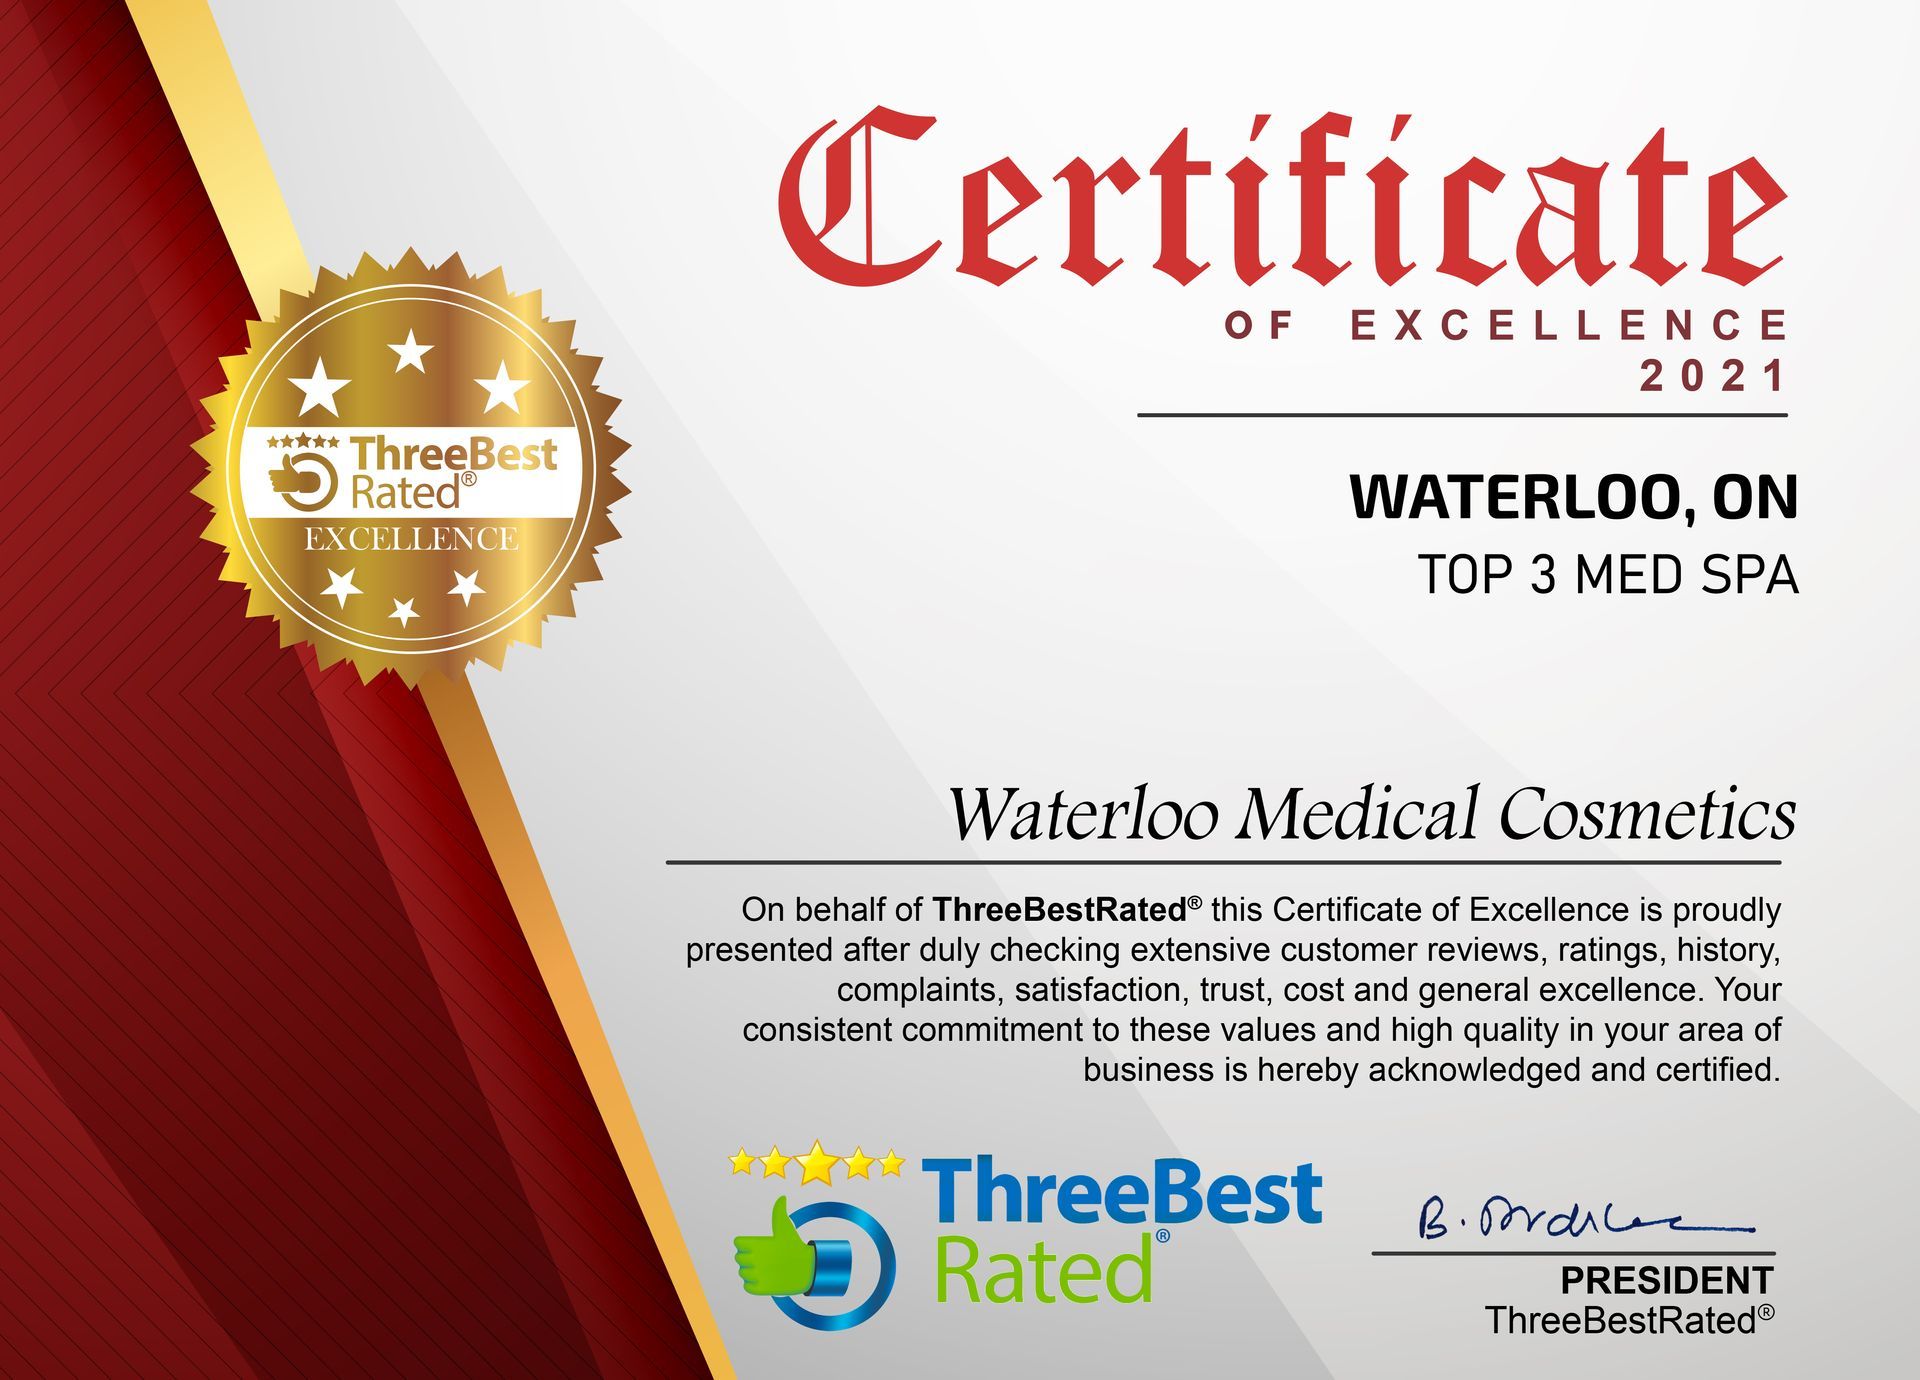 A certificate of excellence for waterloo medical cosmetics